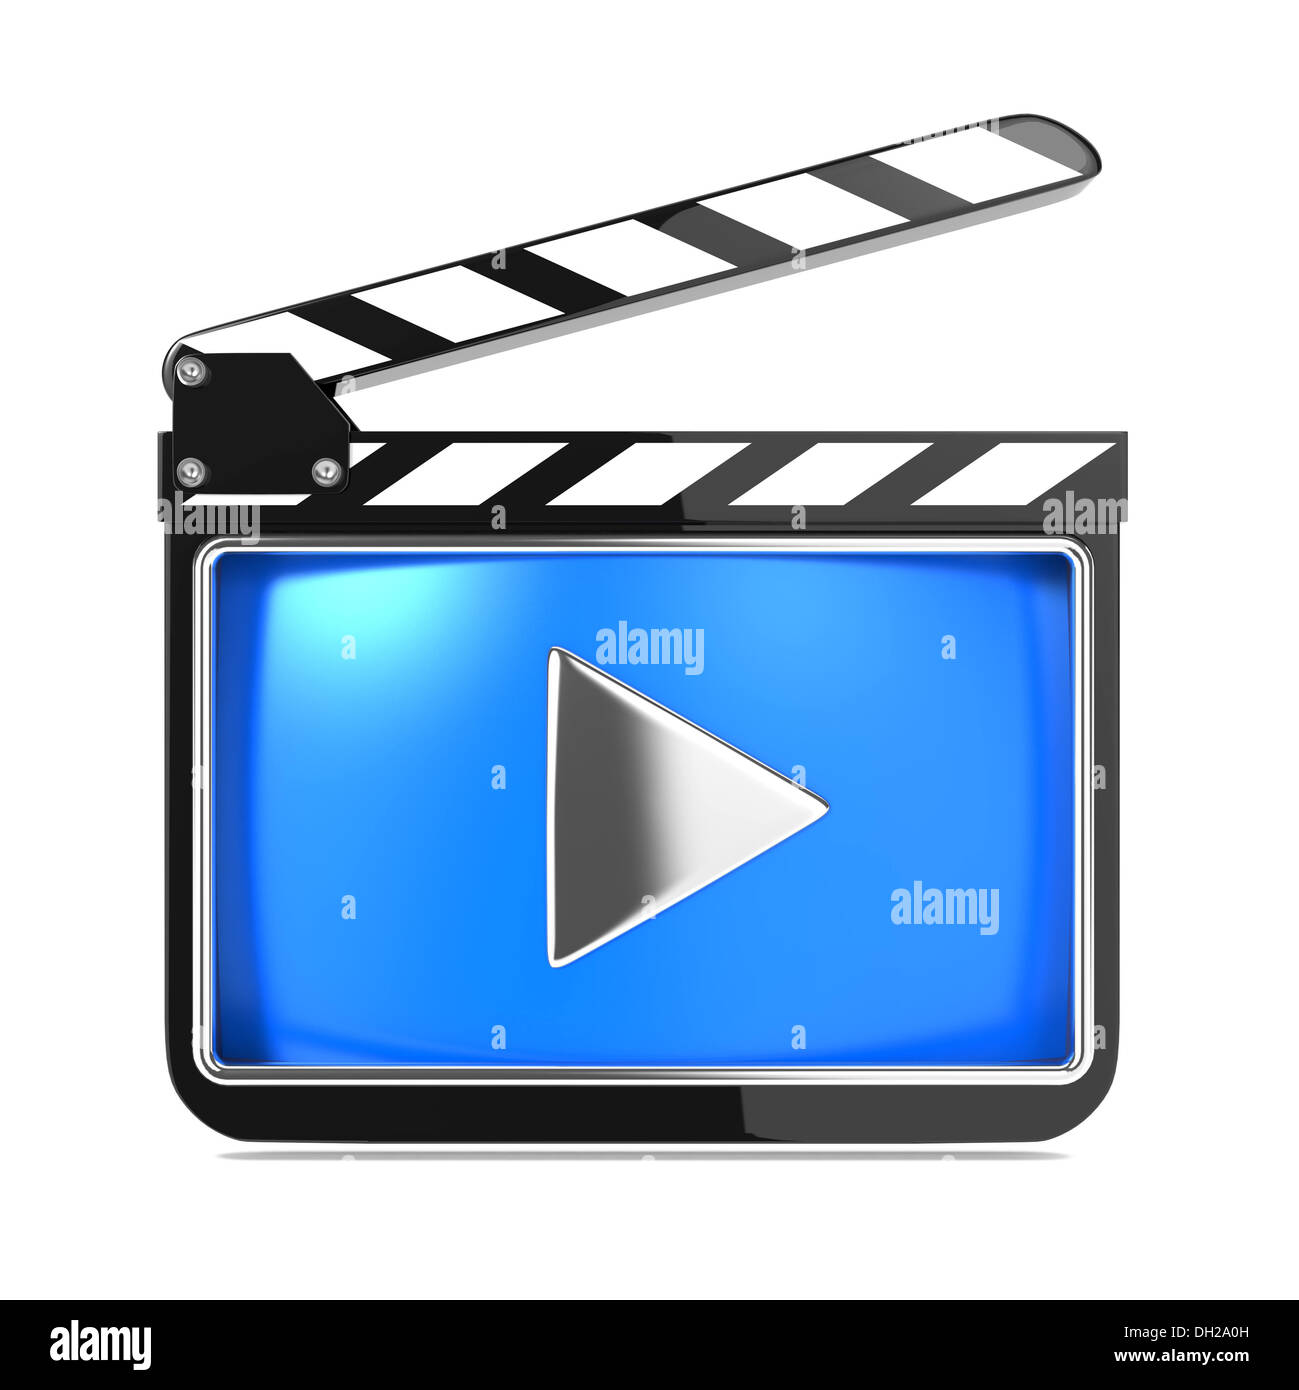 Clapboard with Blue Screen. Media Player Concept. Stock Photo